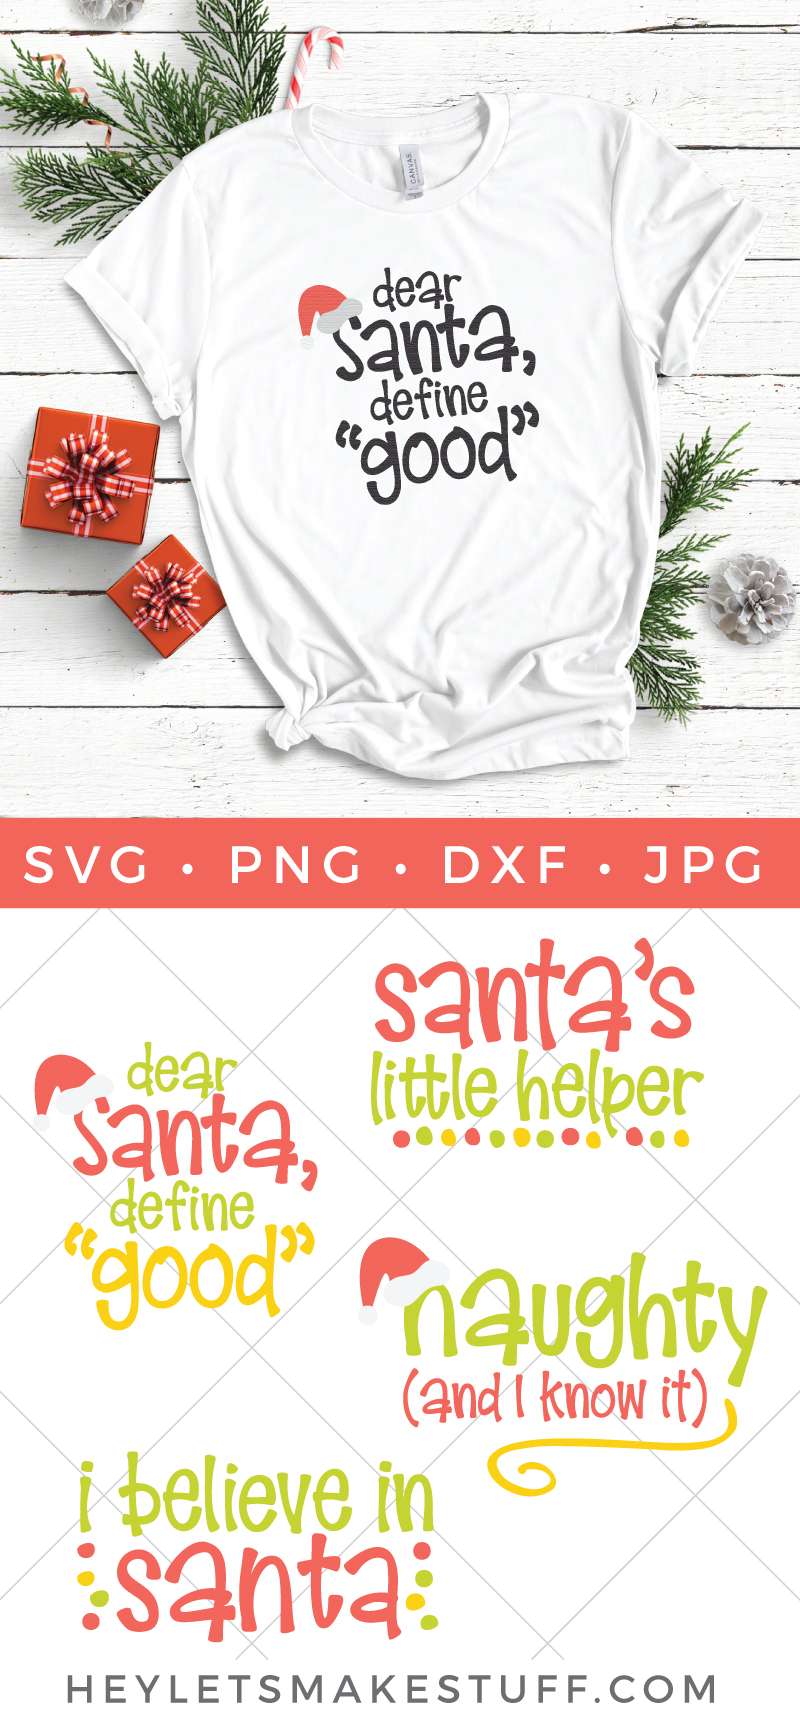 A close up of a white shirt lying next to Christmas decor and decorated with a design that says, \"Dear Santa, Define \"Good\'\" and mages of four cut files that say, \"\"Dear Santa, define \"Good\'\", \"Santa\'s Little Helper\", \"Naughty (and I know it)\" and \"I Believe in Santa\" with advertising from HEYLETSMAKESTUFF.COM